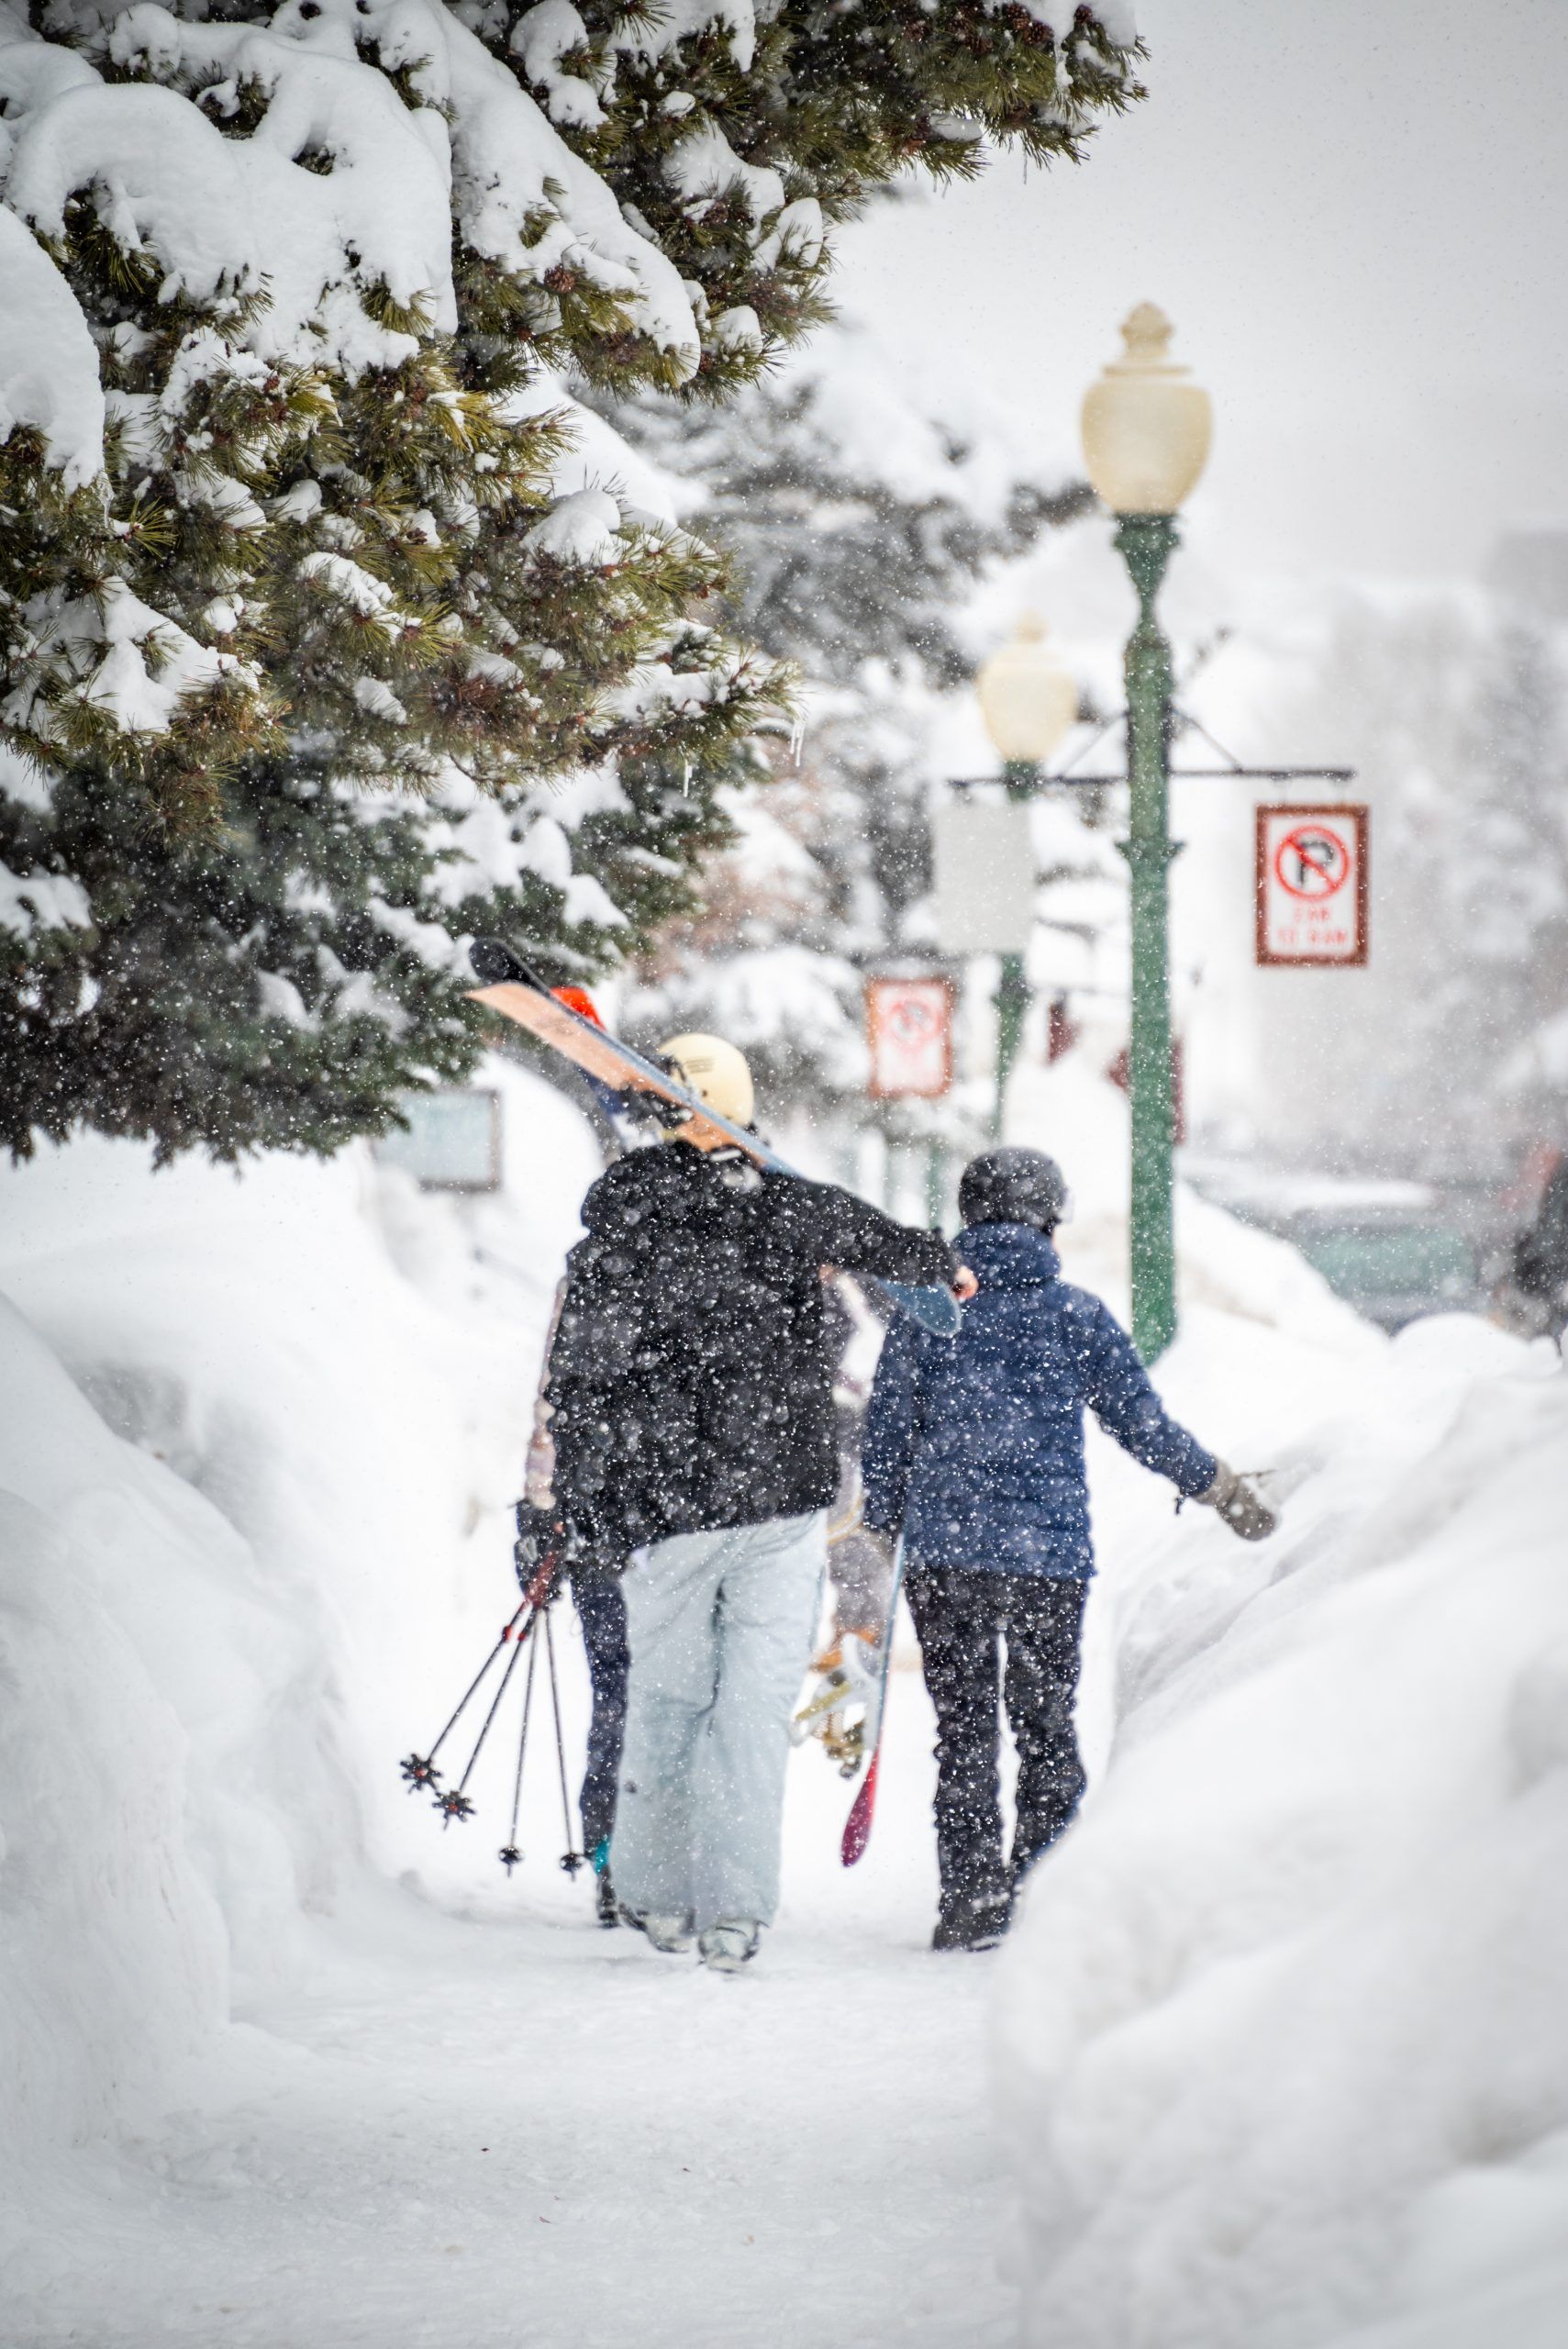 People carrying skis down a snow-lined sidewalk in Crested Butte.